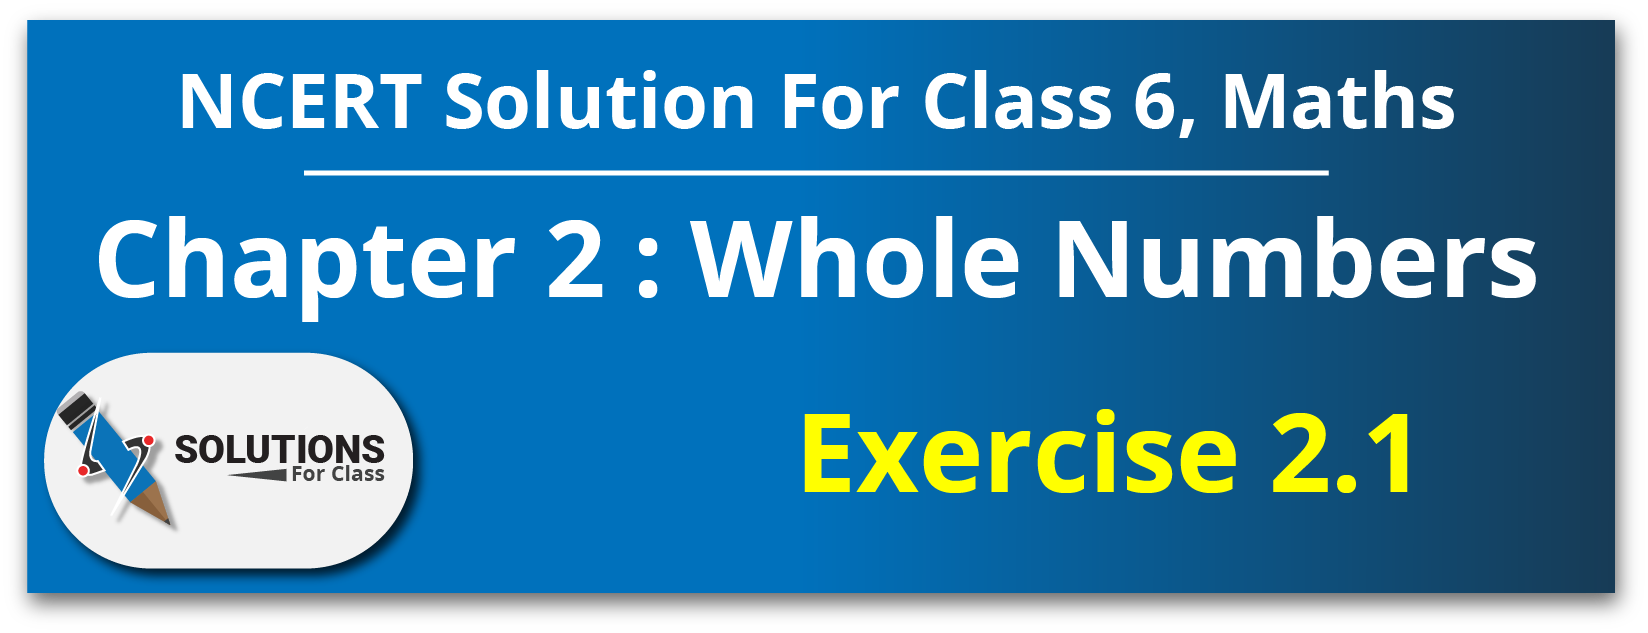 NCERT Solutions for Class 6 Maths, chapter 2, Whole Numbers, Exercise 2.1